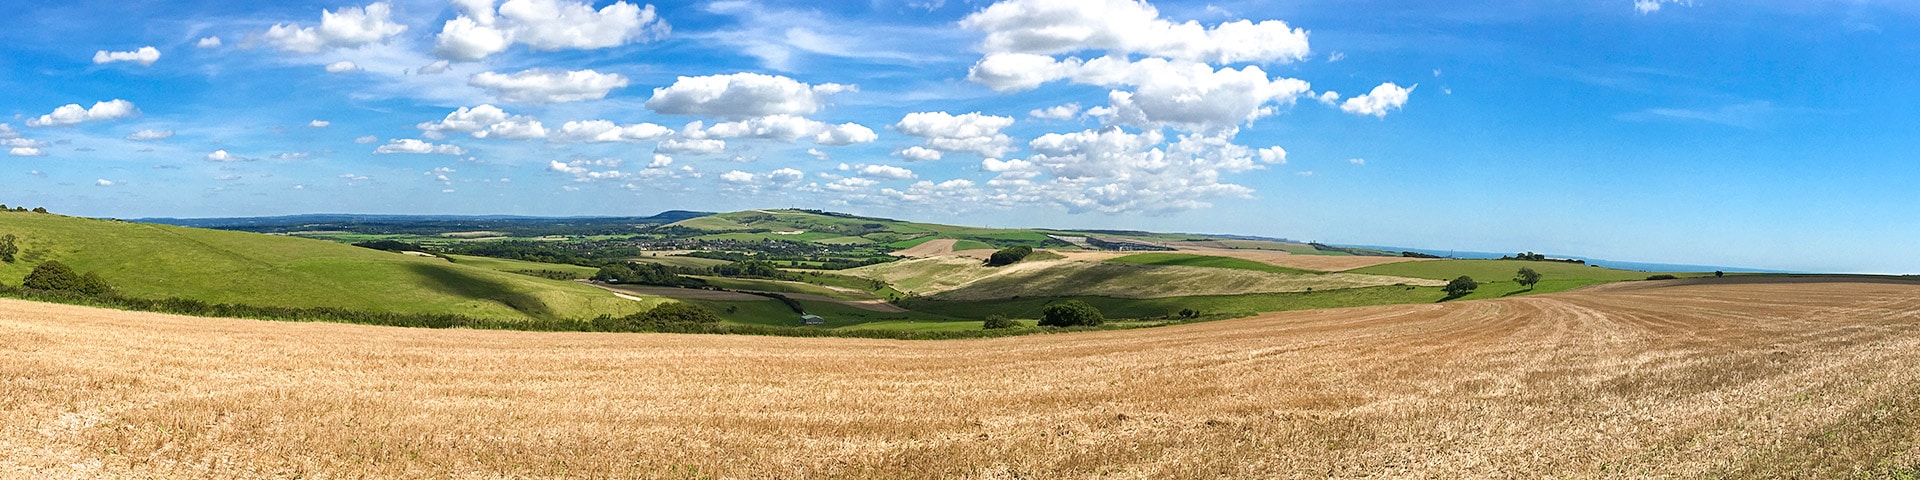 Hiking in England, South Downs National Park